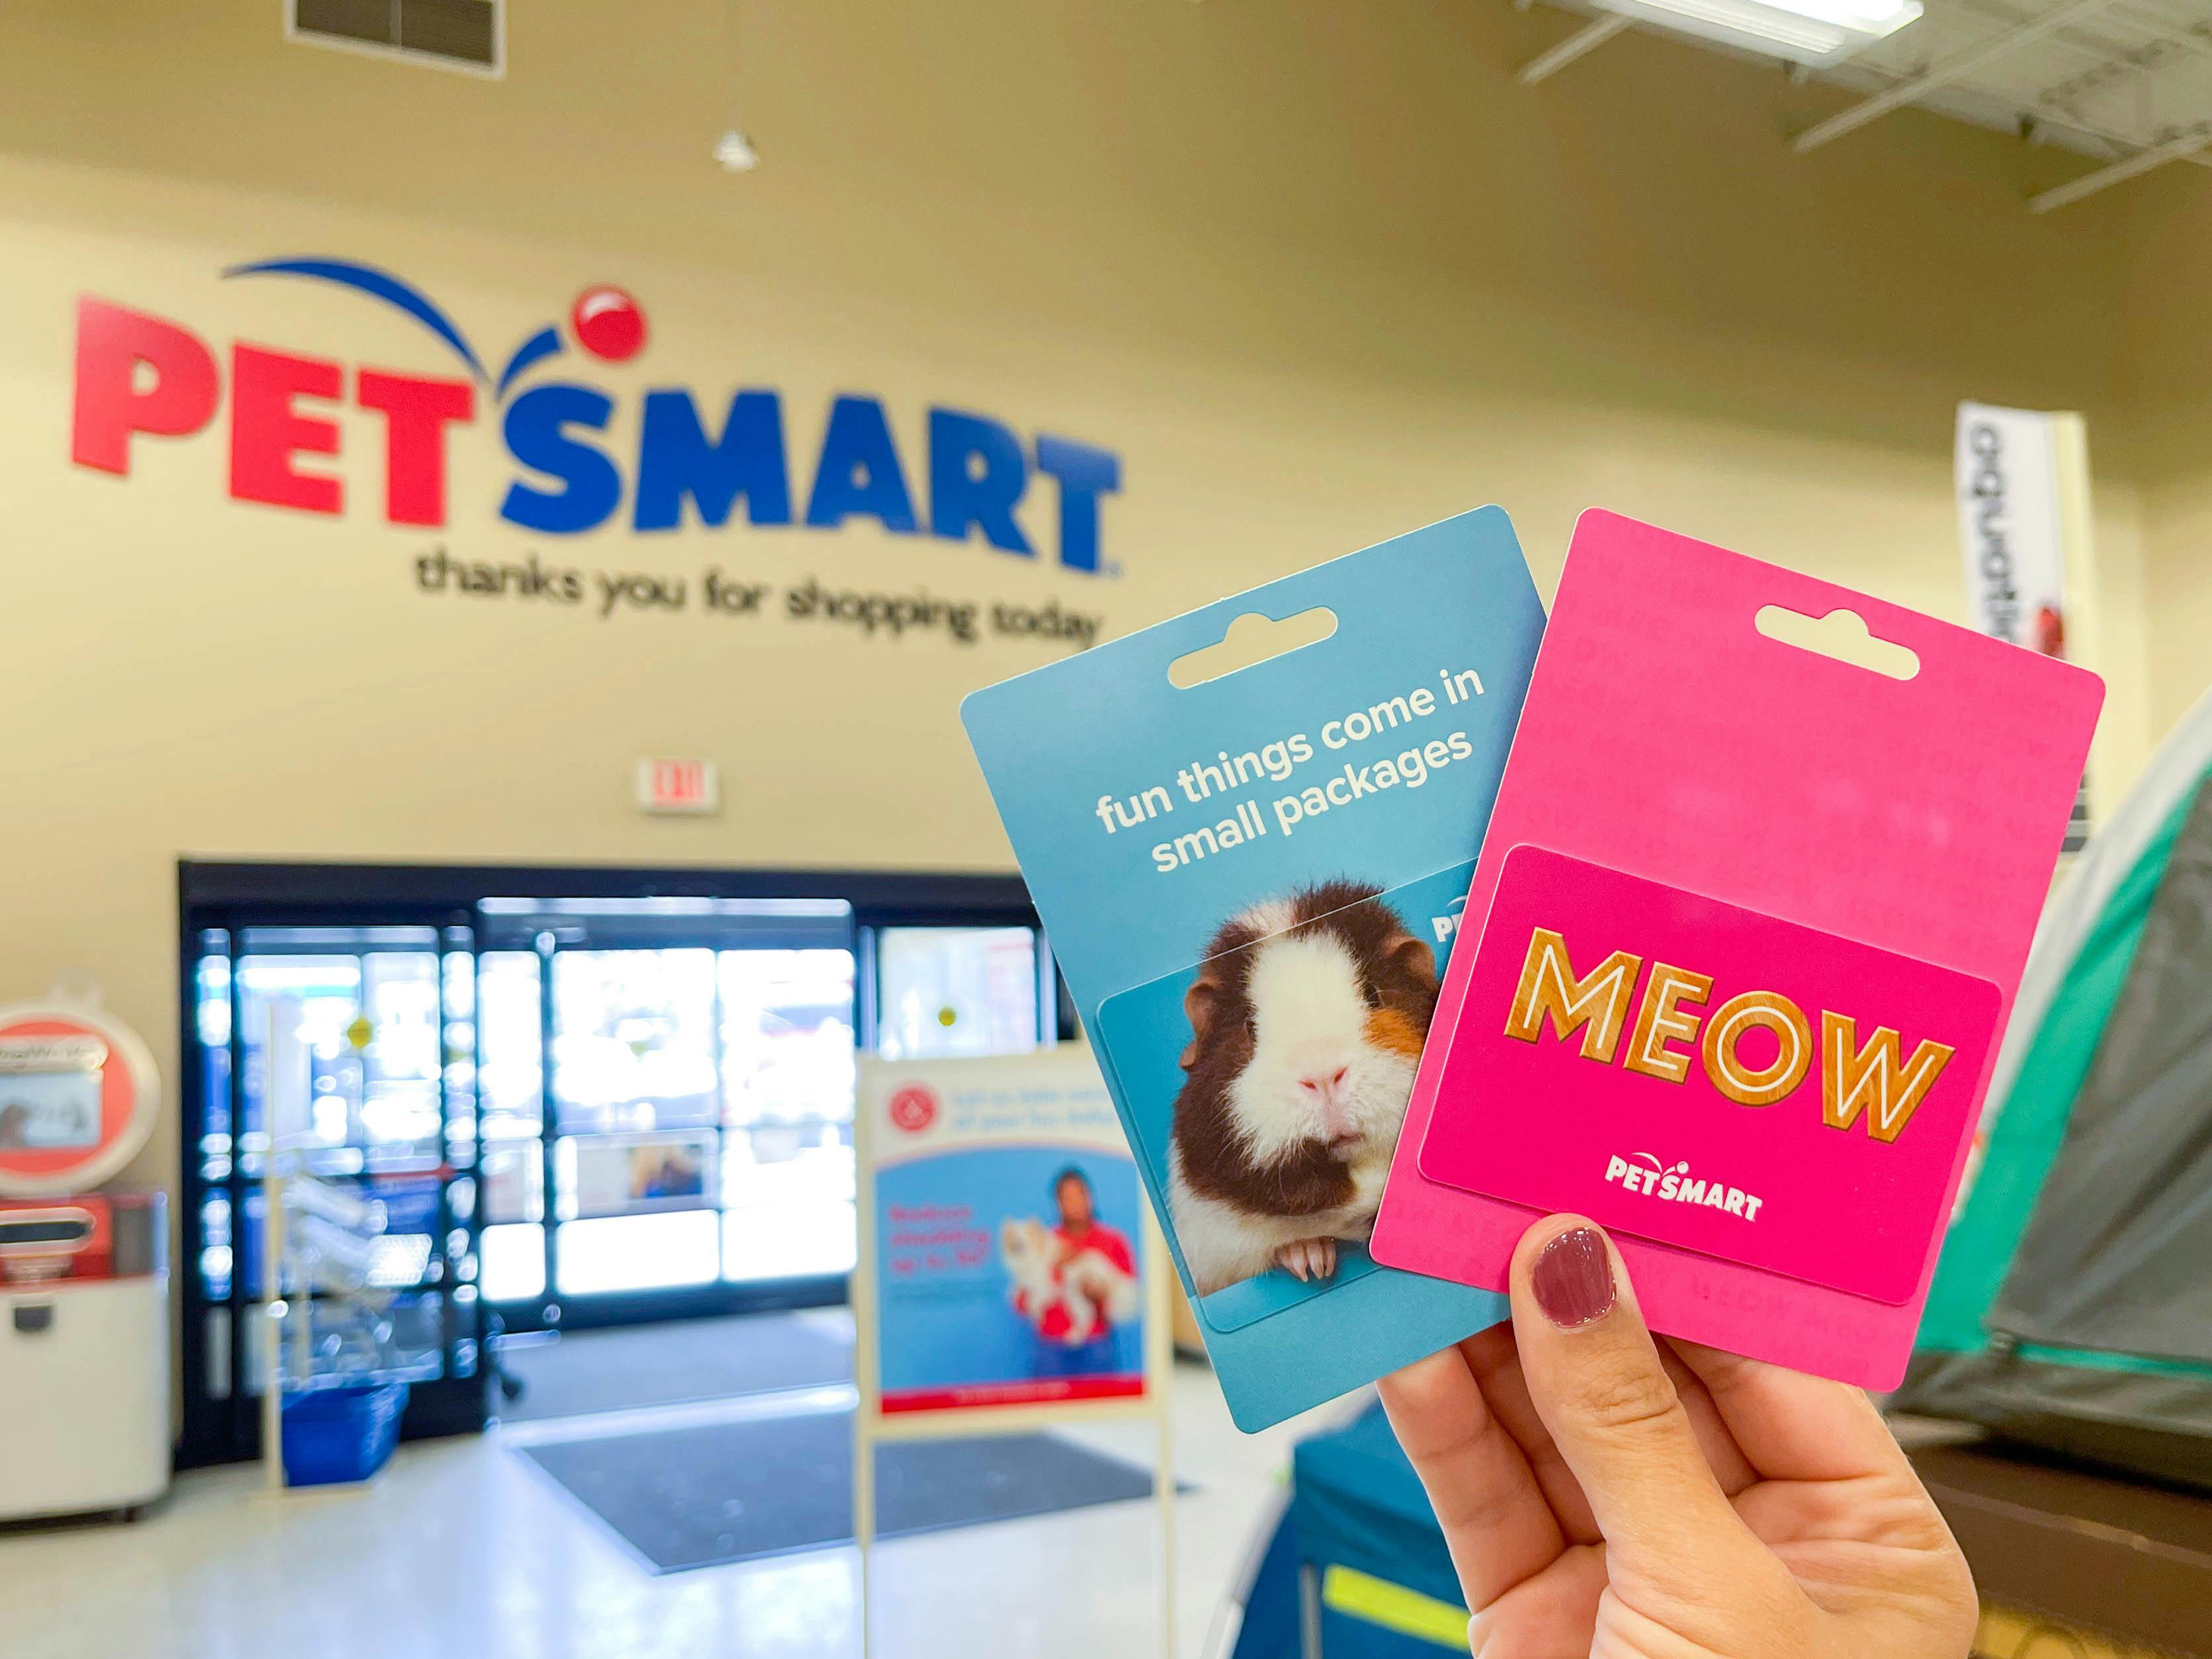 Petsmart Tips Gift Cards 2022 1649465038 1649465038 ?auto=compress,format&fit=max